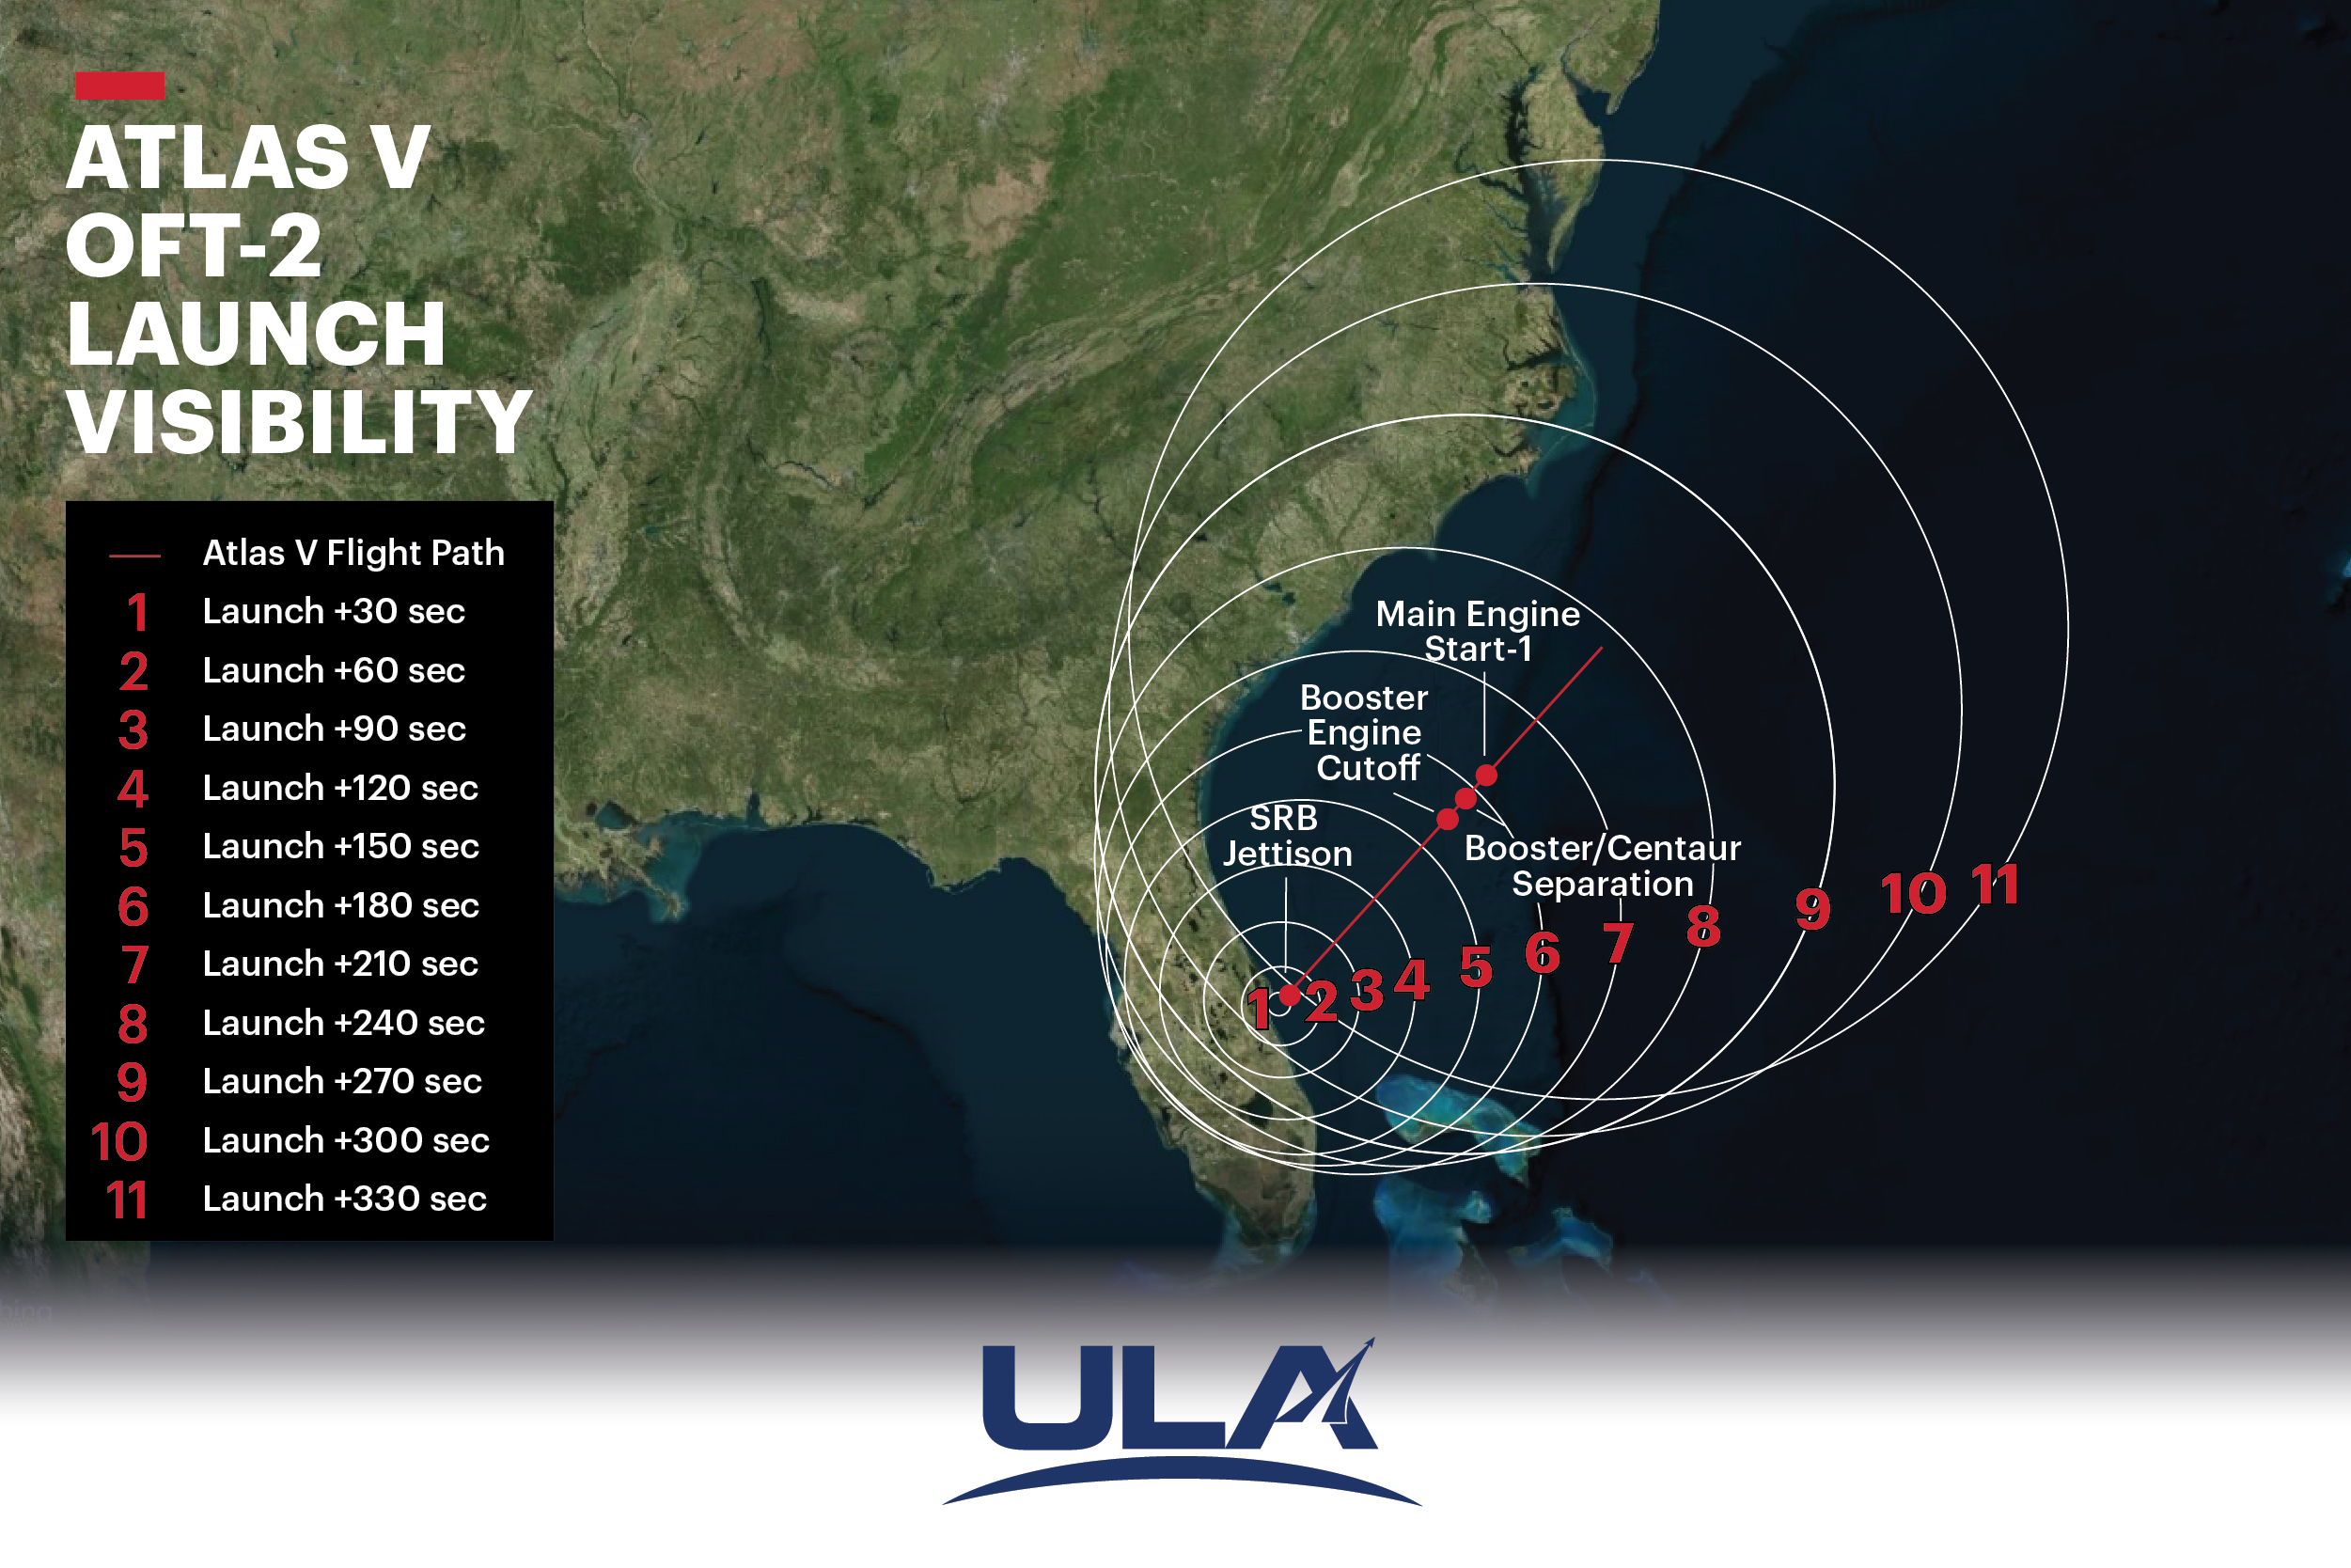 Visibility map for the OFT-2 launch to the International Space Station on May 19, 2022.